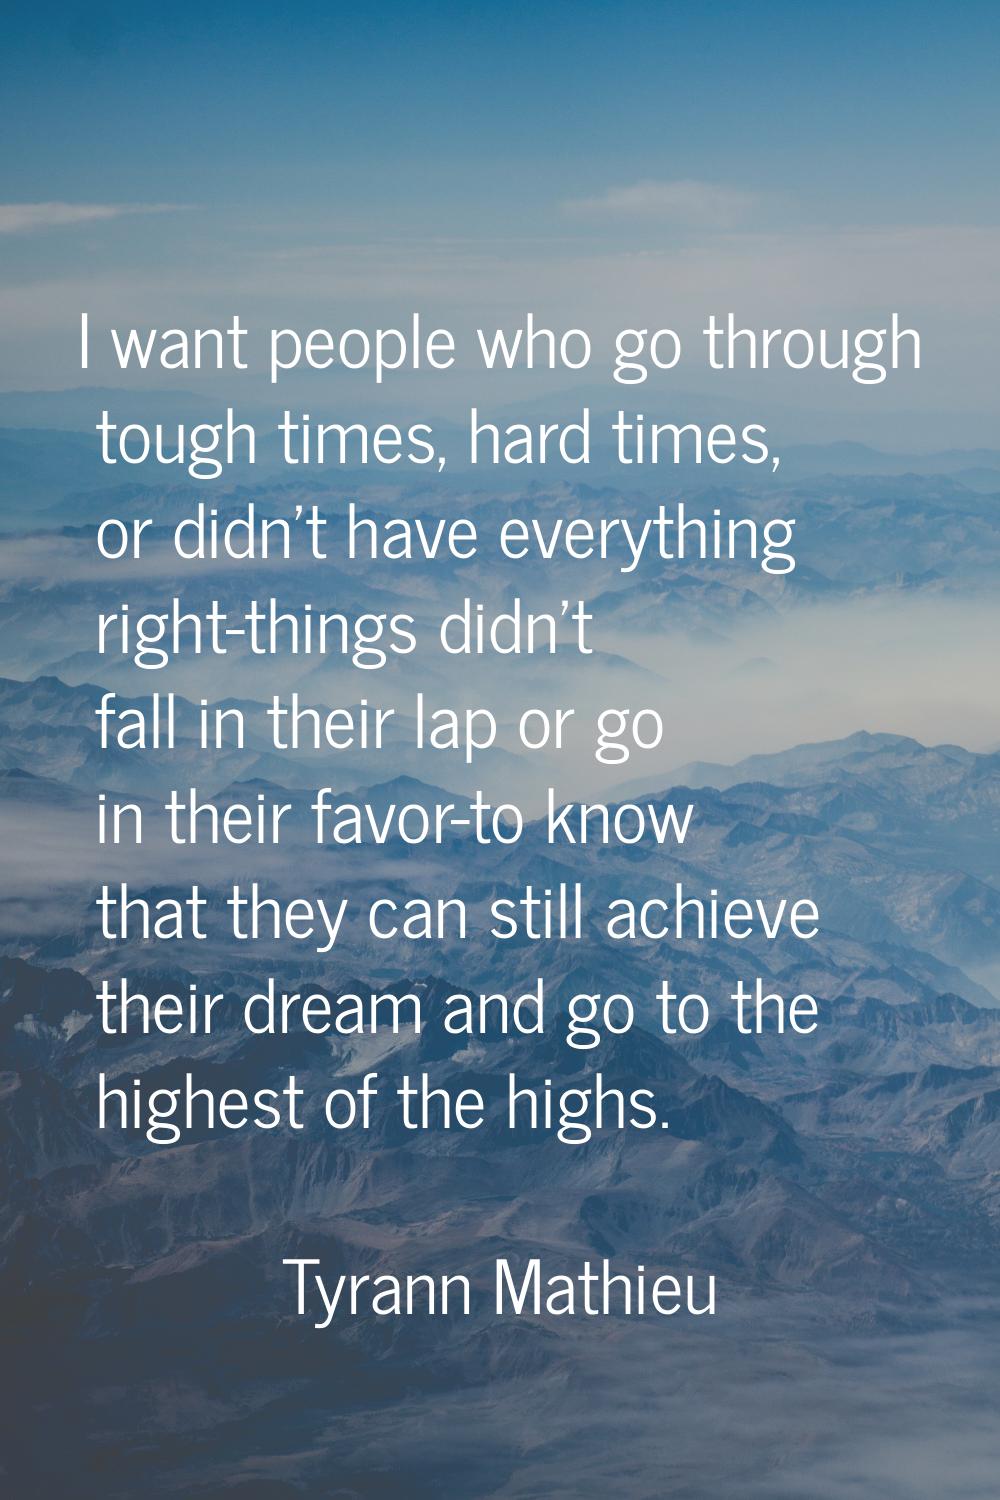 I want people who go through tough times, hard times, or didn't have everything right-things didn't